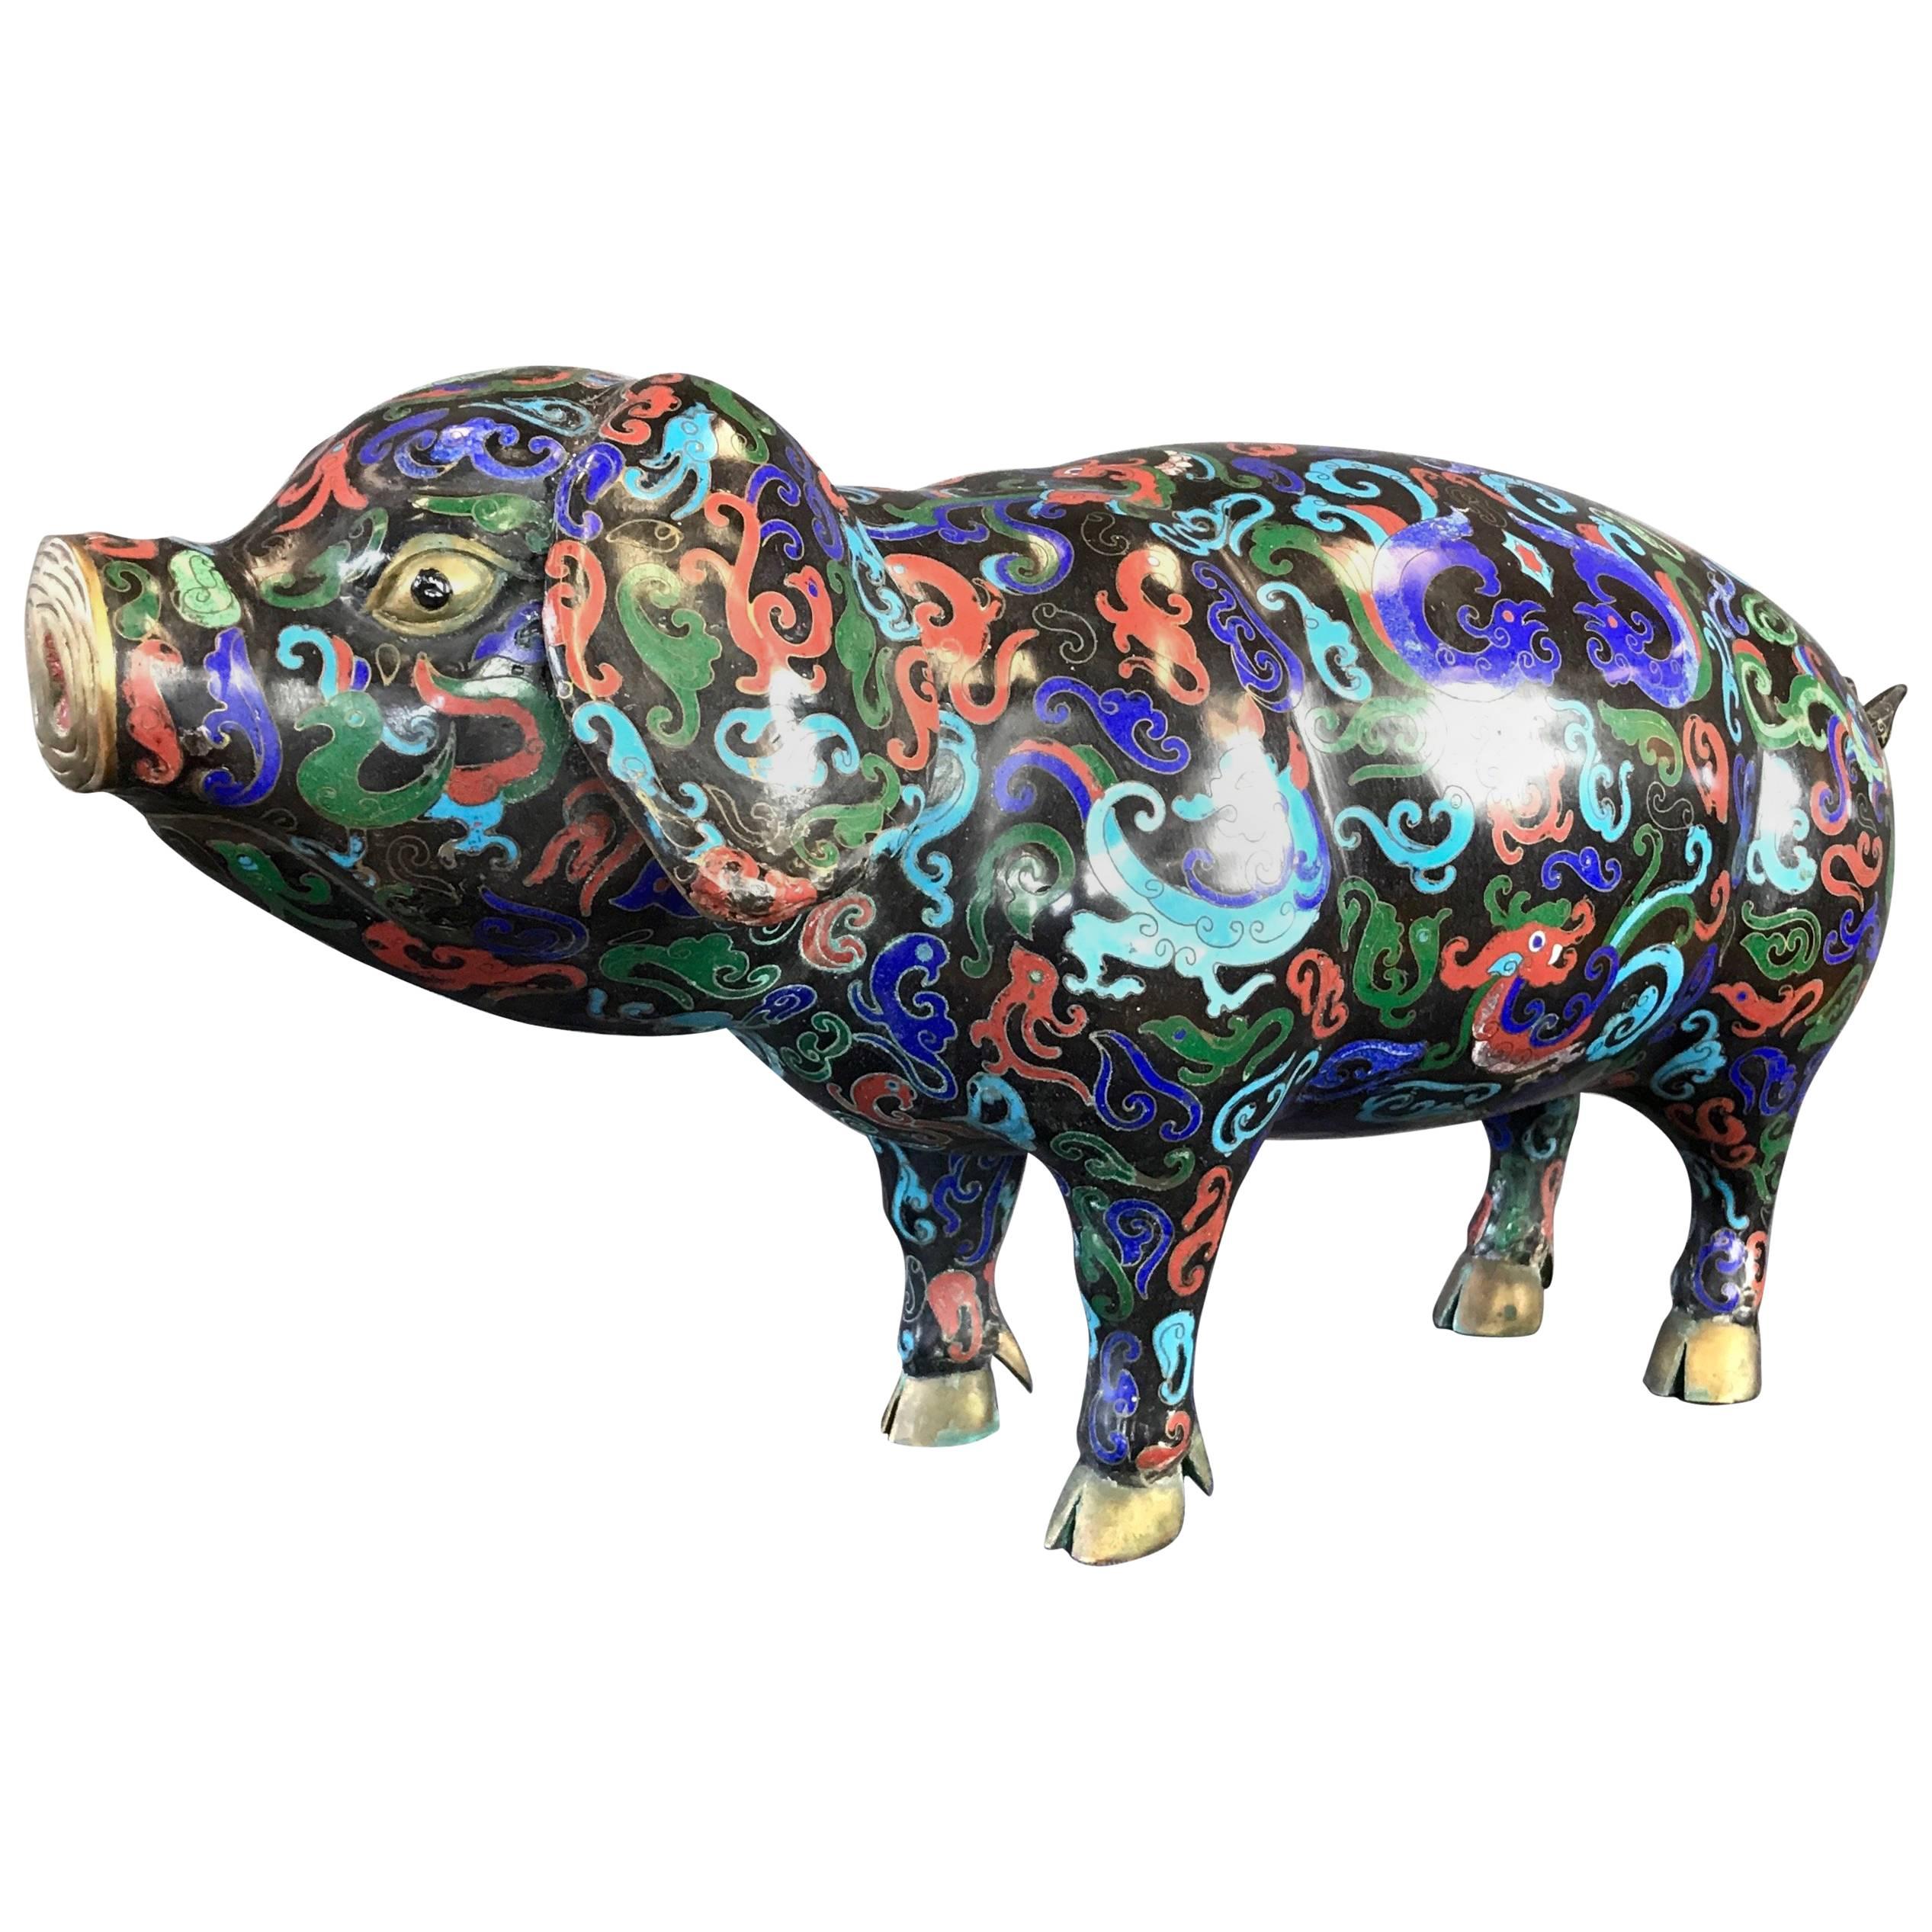 Vintage Uncommonly Large Chinese Cloisonné Pig